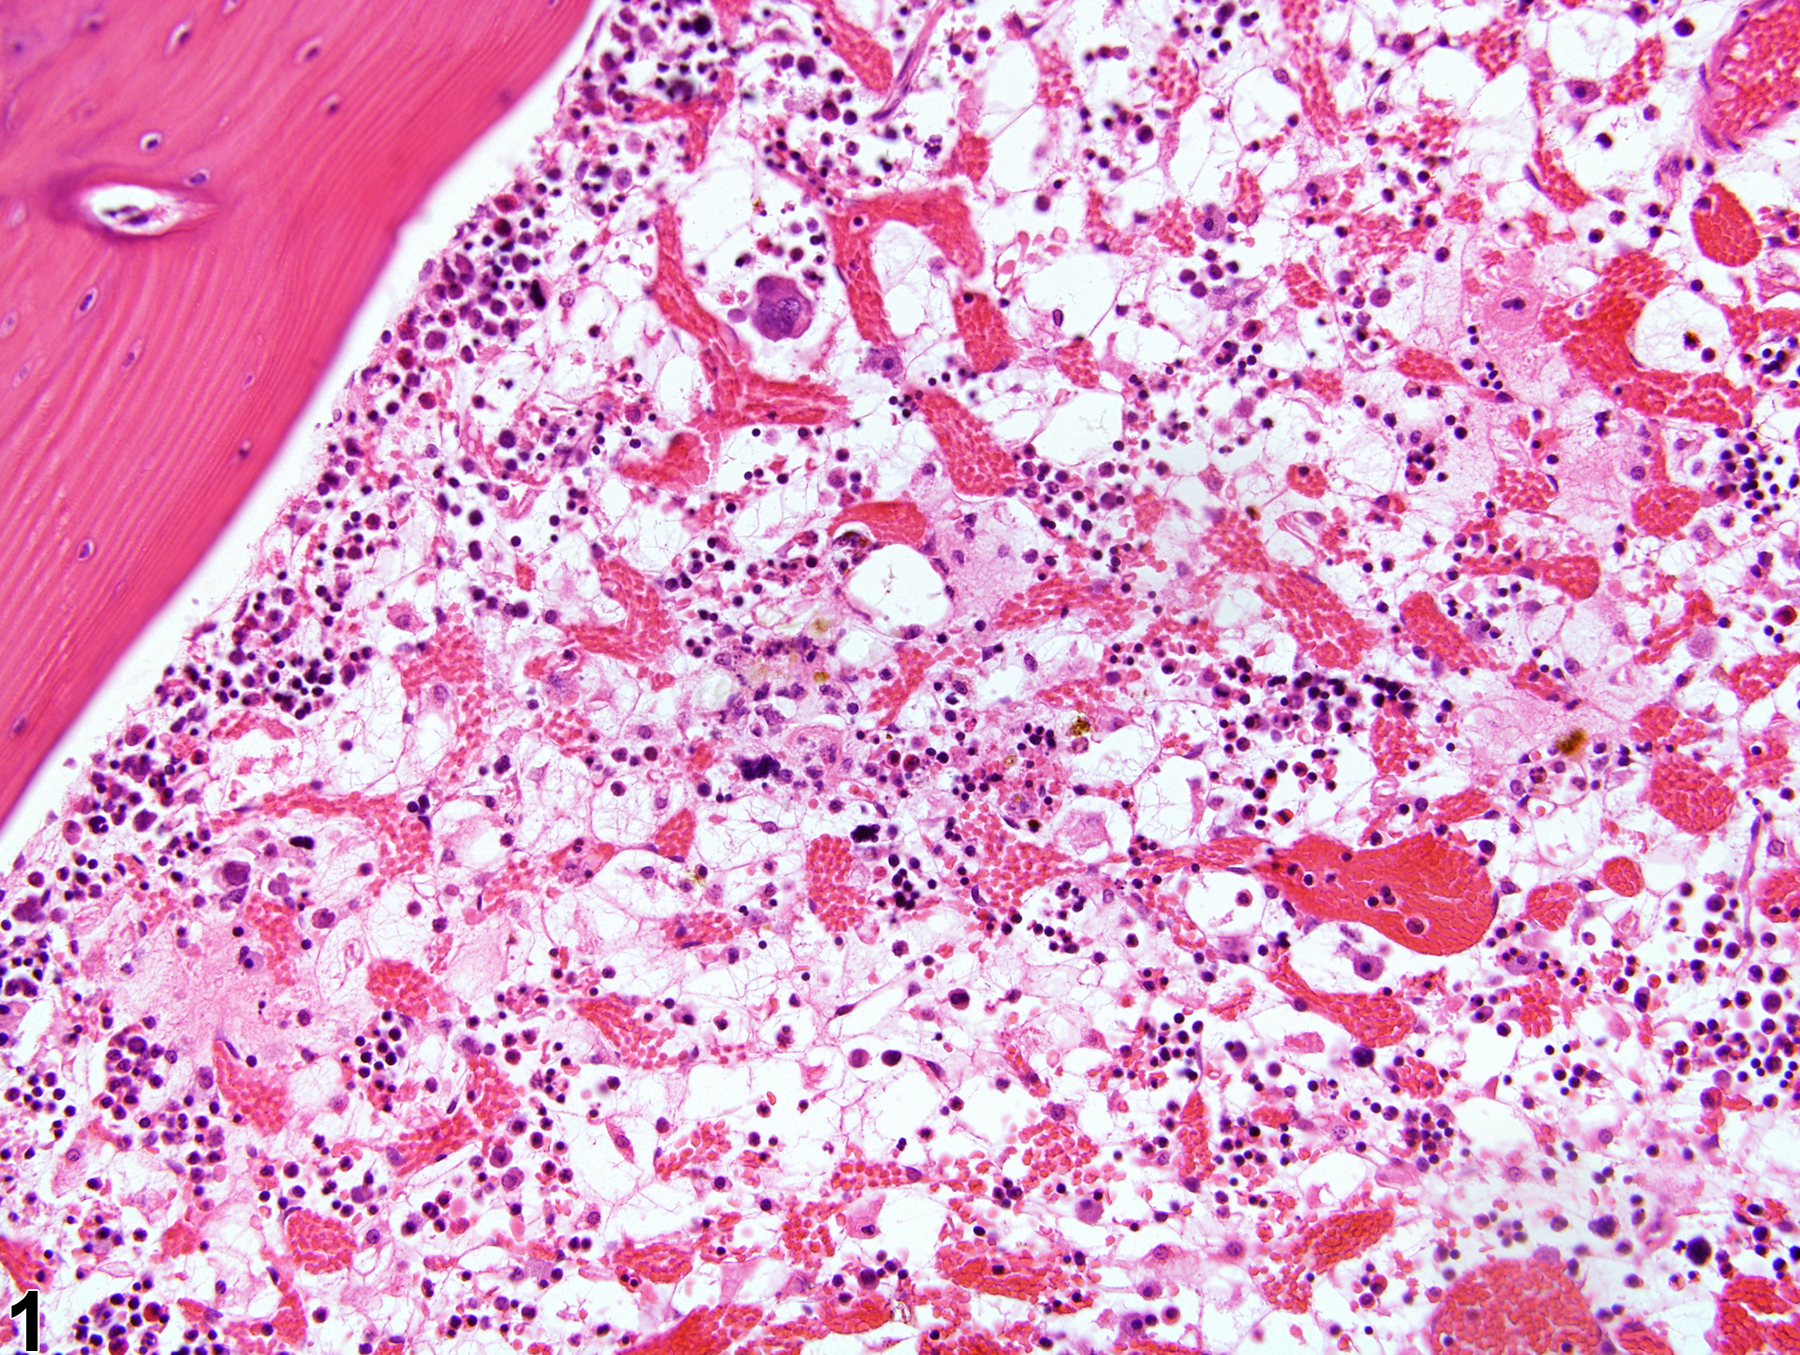 Image of gelatinous transformation in the bone marrow from a female F344/N rat in a subchronic study